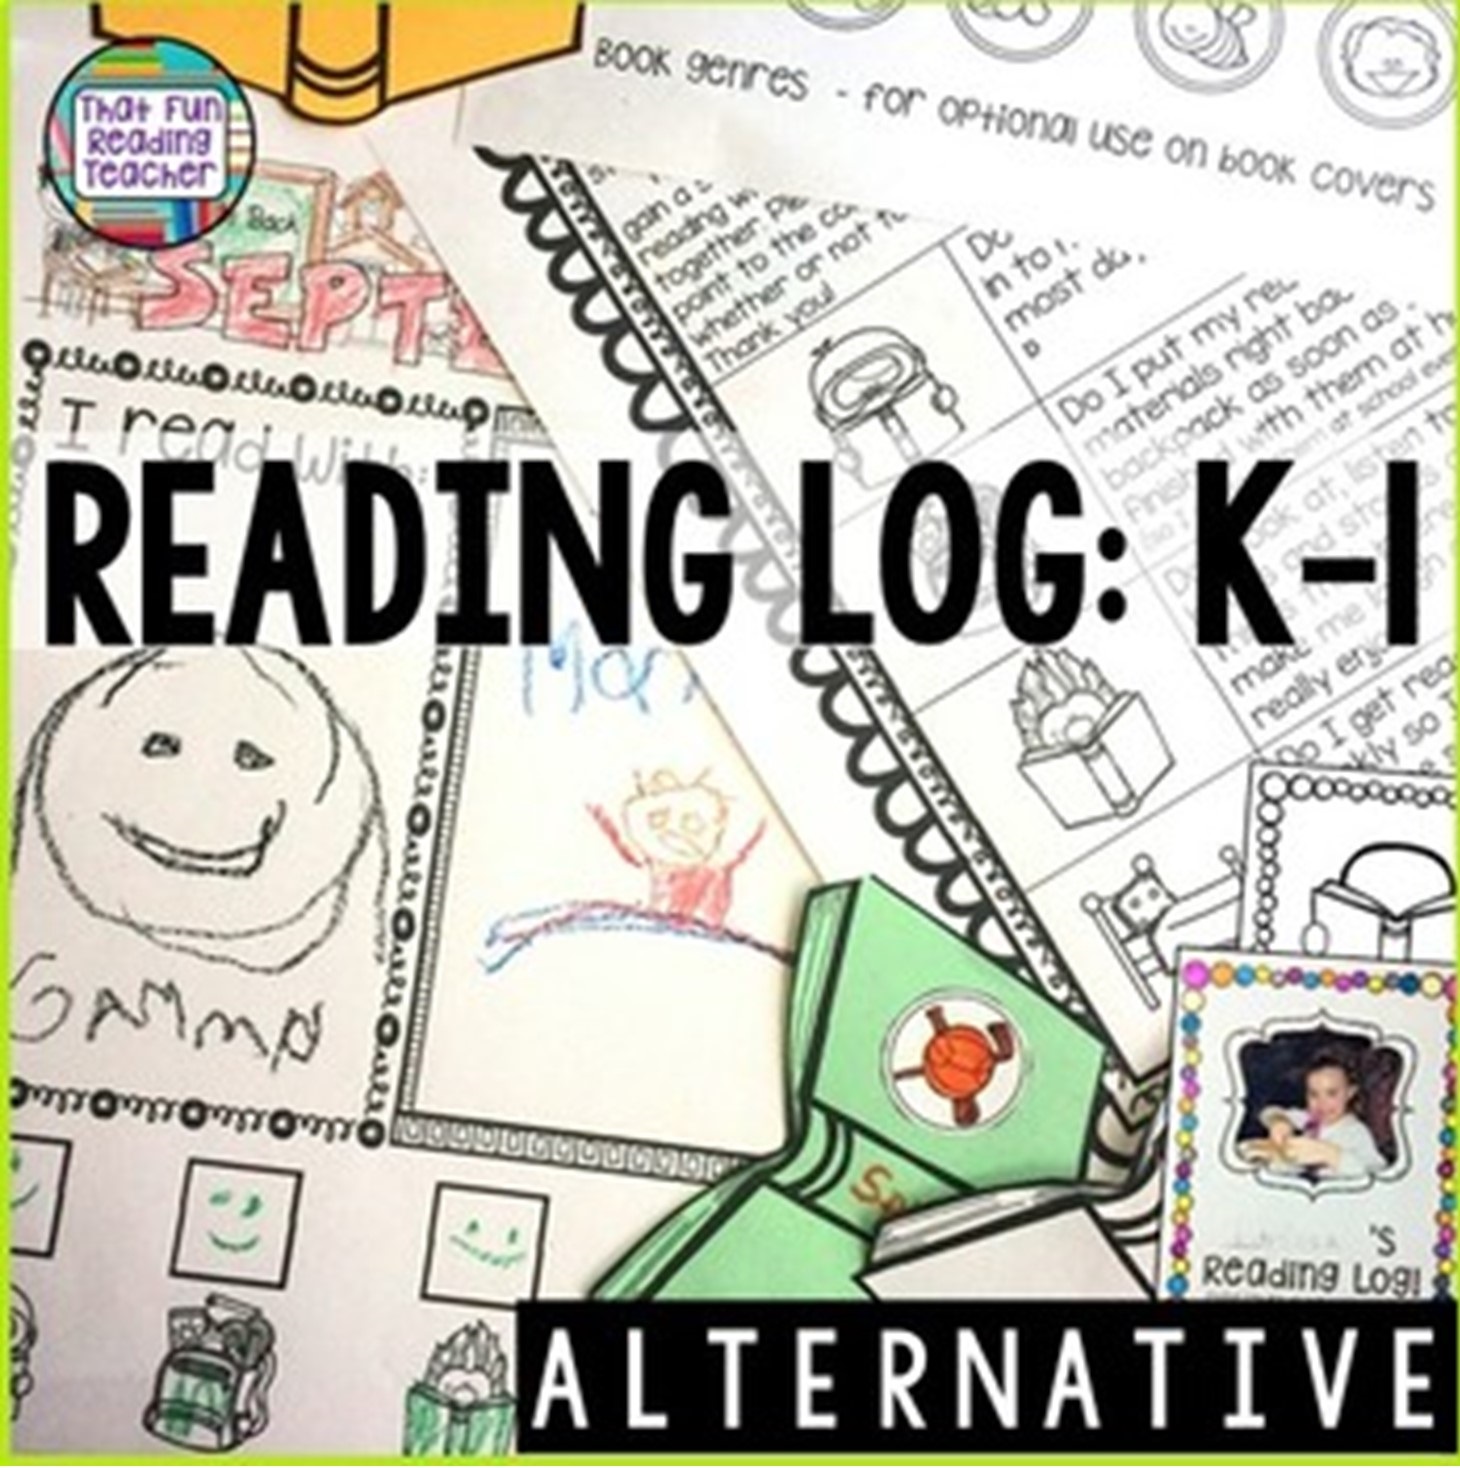 This is the fun, alternative reading log I use with my K-1 students, encouraging pride and age-appropriate responsibility! $